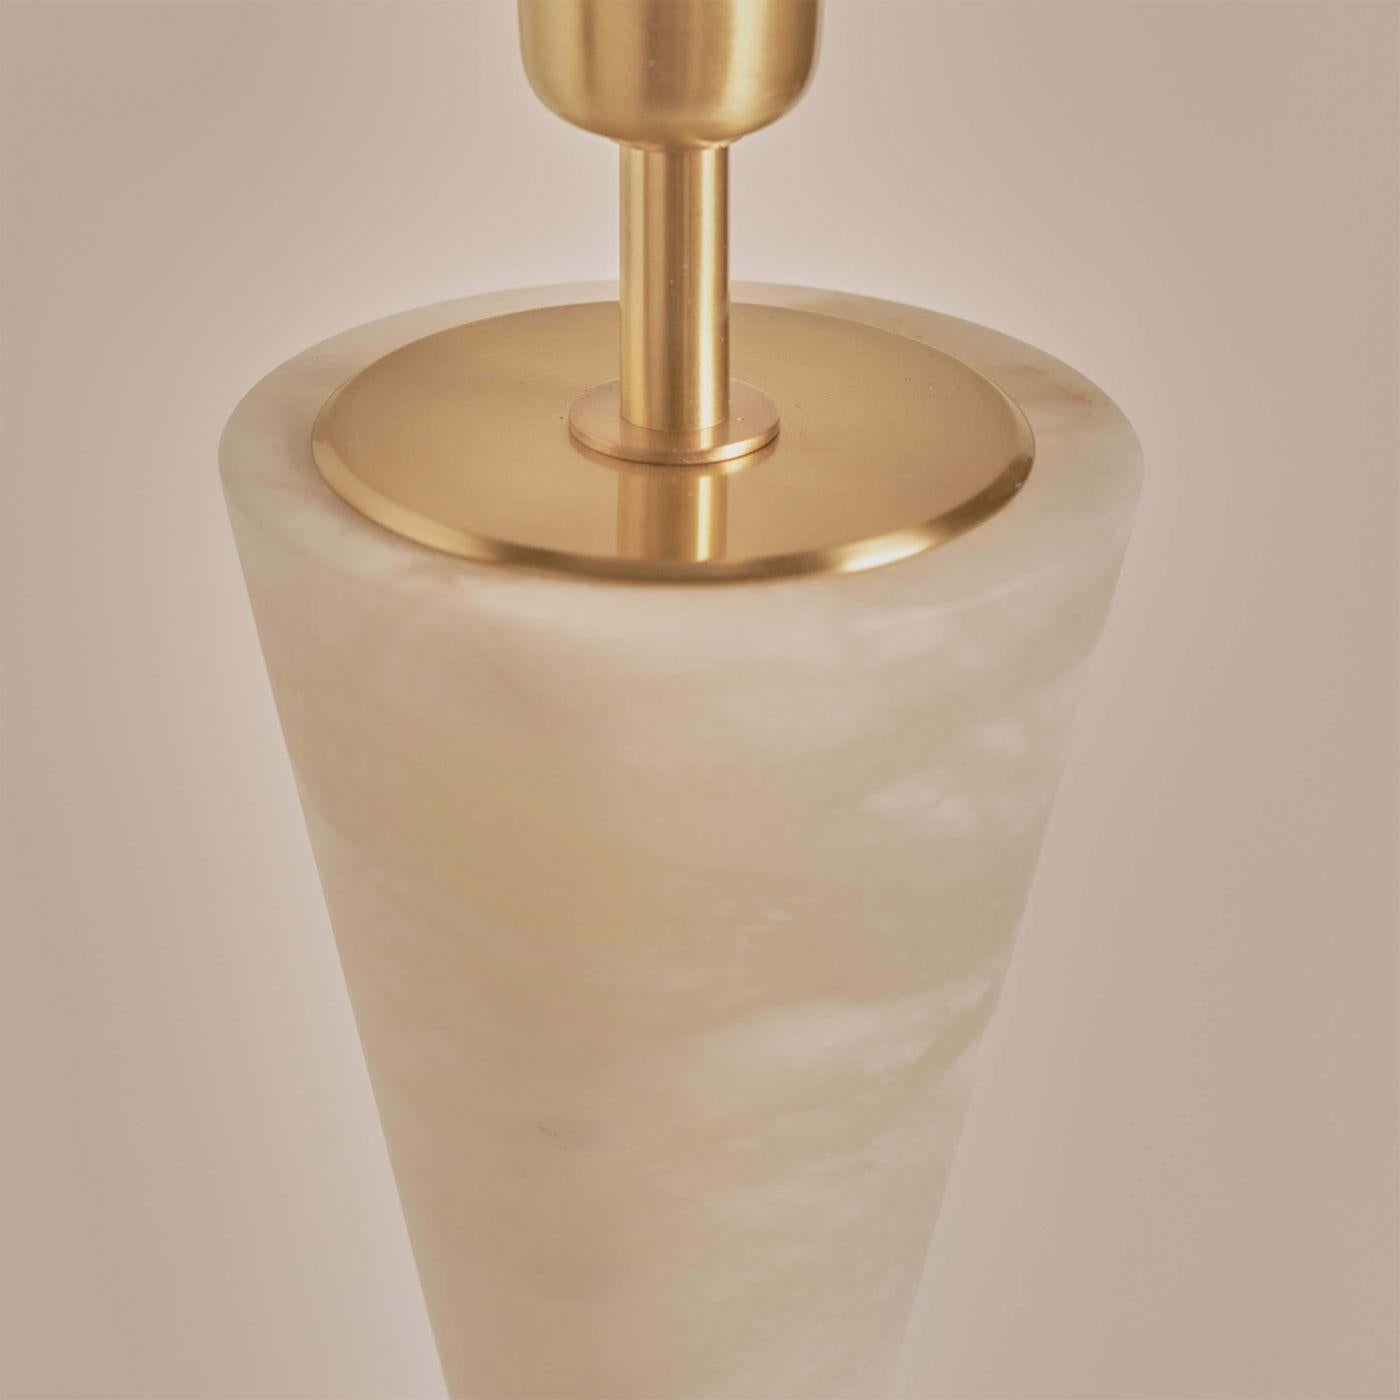 The Silhouette table lamp consists of two alabaster cones hoes vertices meet through a decorative solid brass sphere. Its curved shape gives the light an elegant and sophisticated profile combining the alabaster's heaviness with the brass's